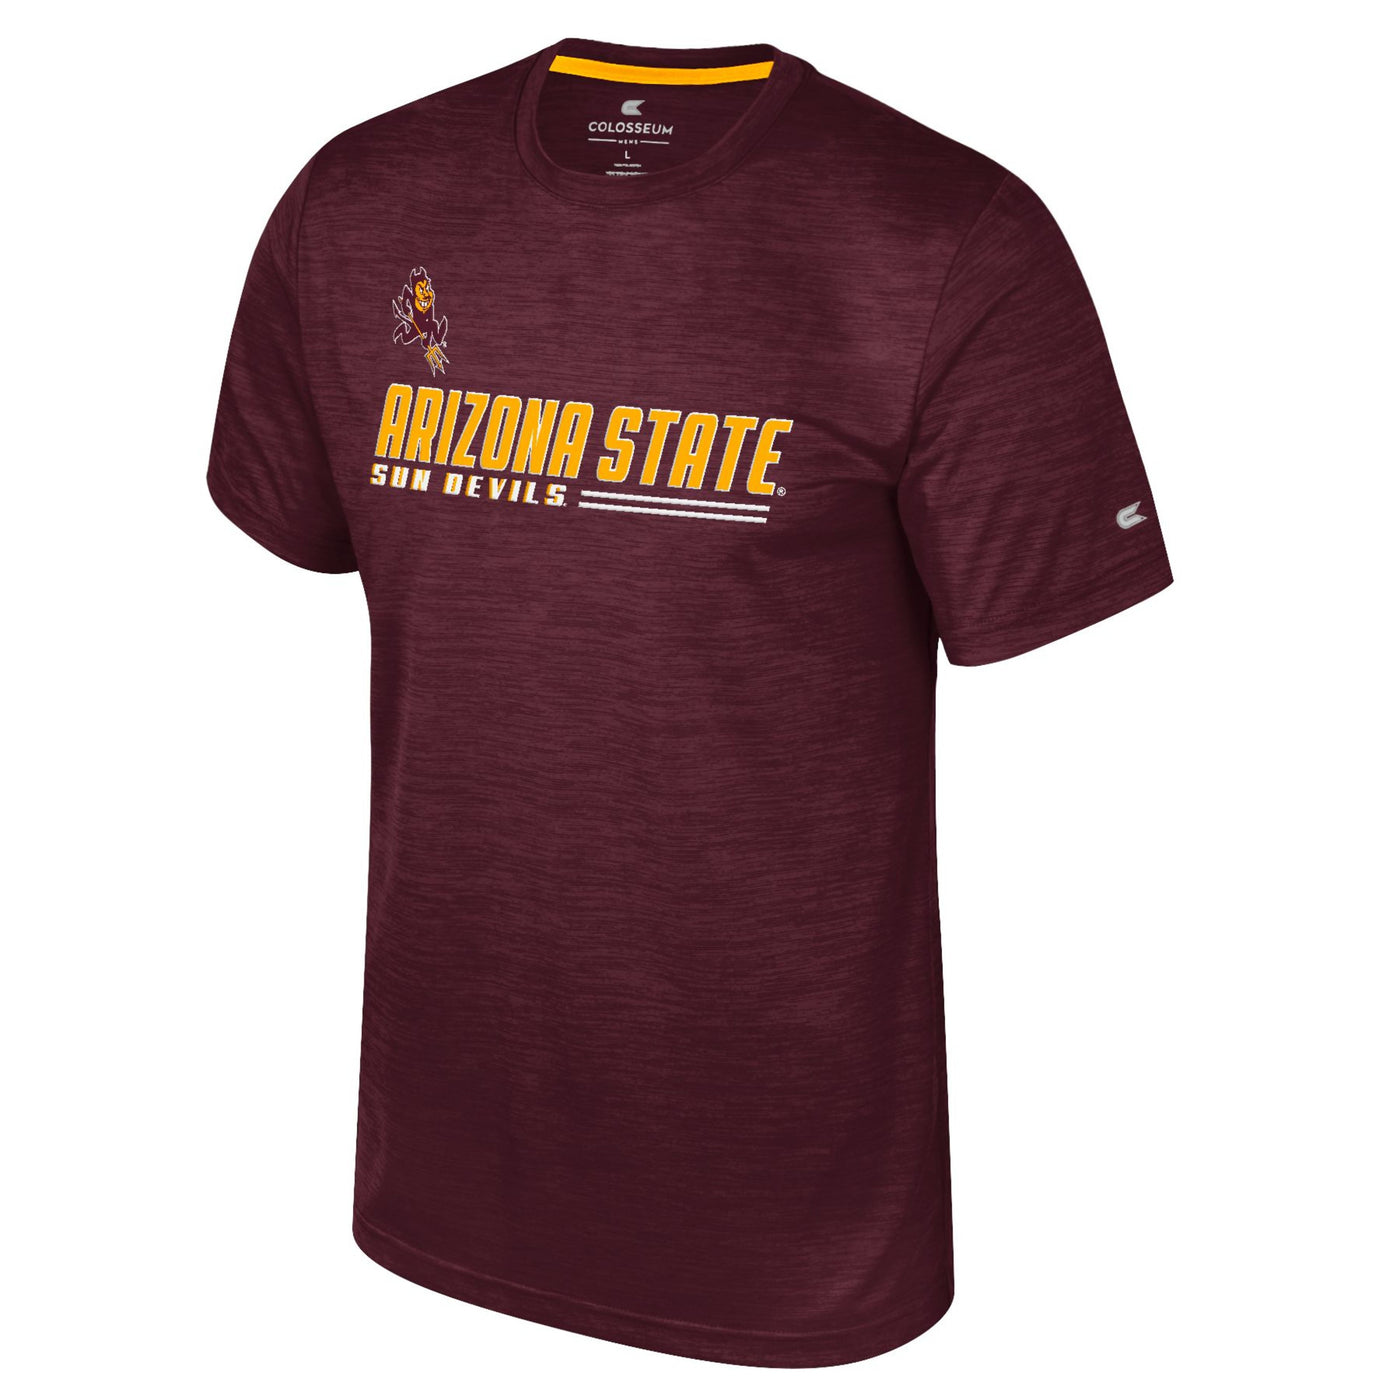 ASU maroon t-shirt with a small sparky logo in the corner of the chest above the gold text 